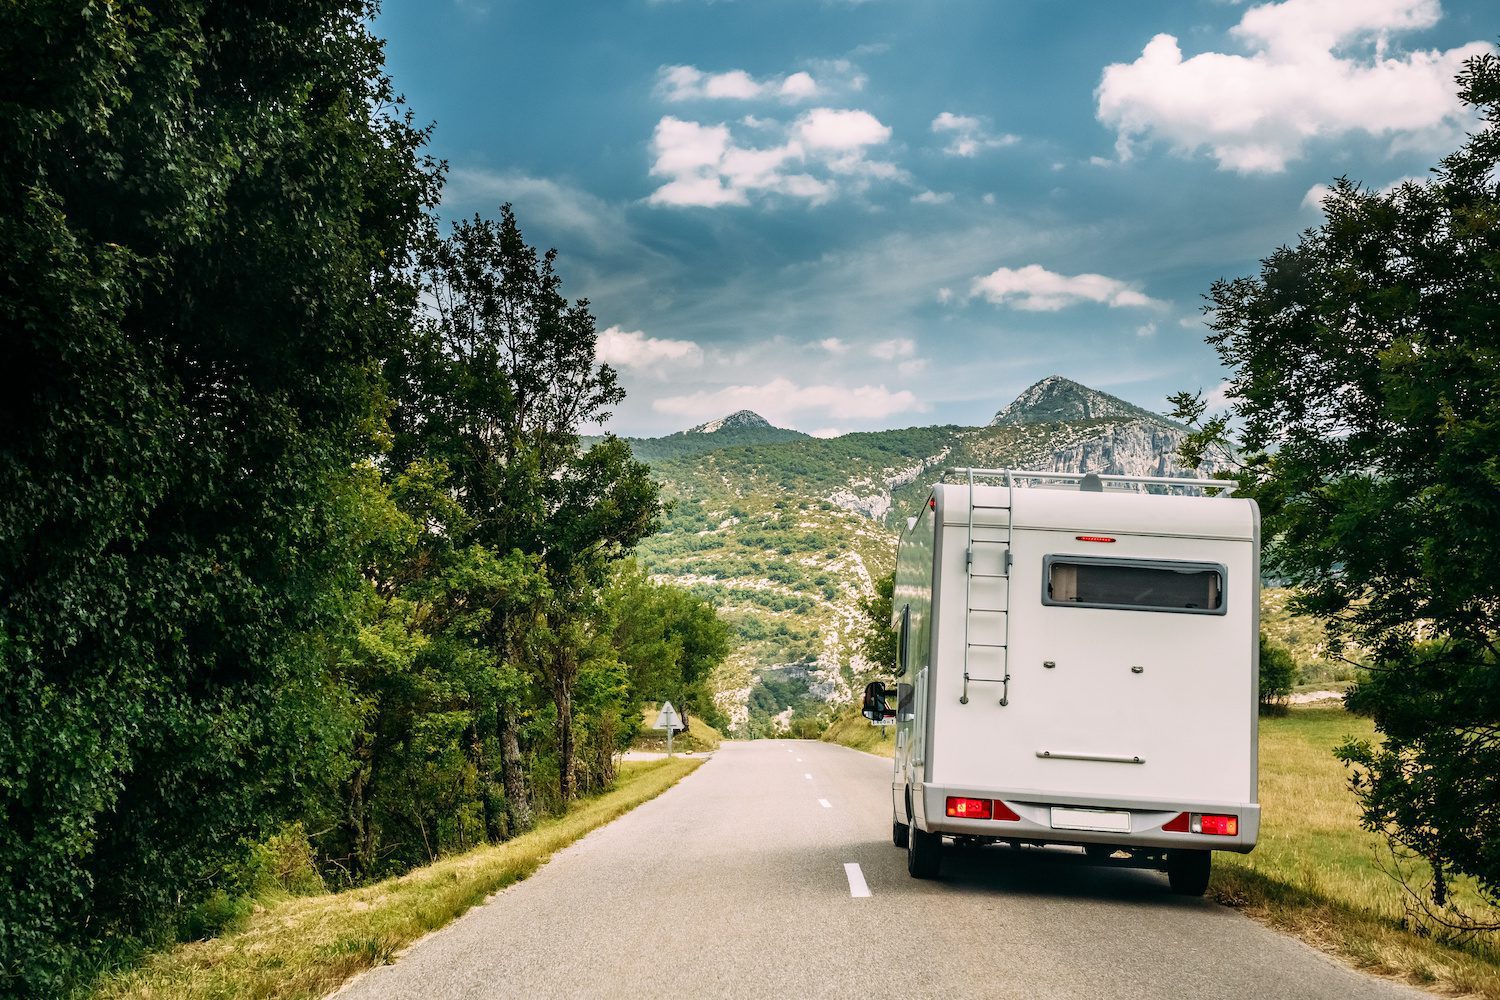 White Colour Motorhome Car Goes On Road On Background Of French Mountain Nature Landscape.